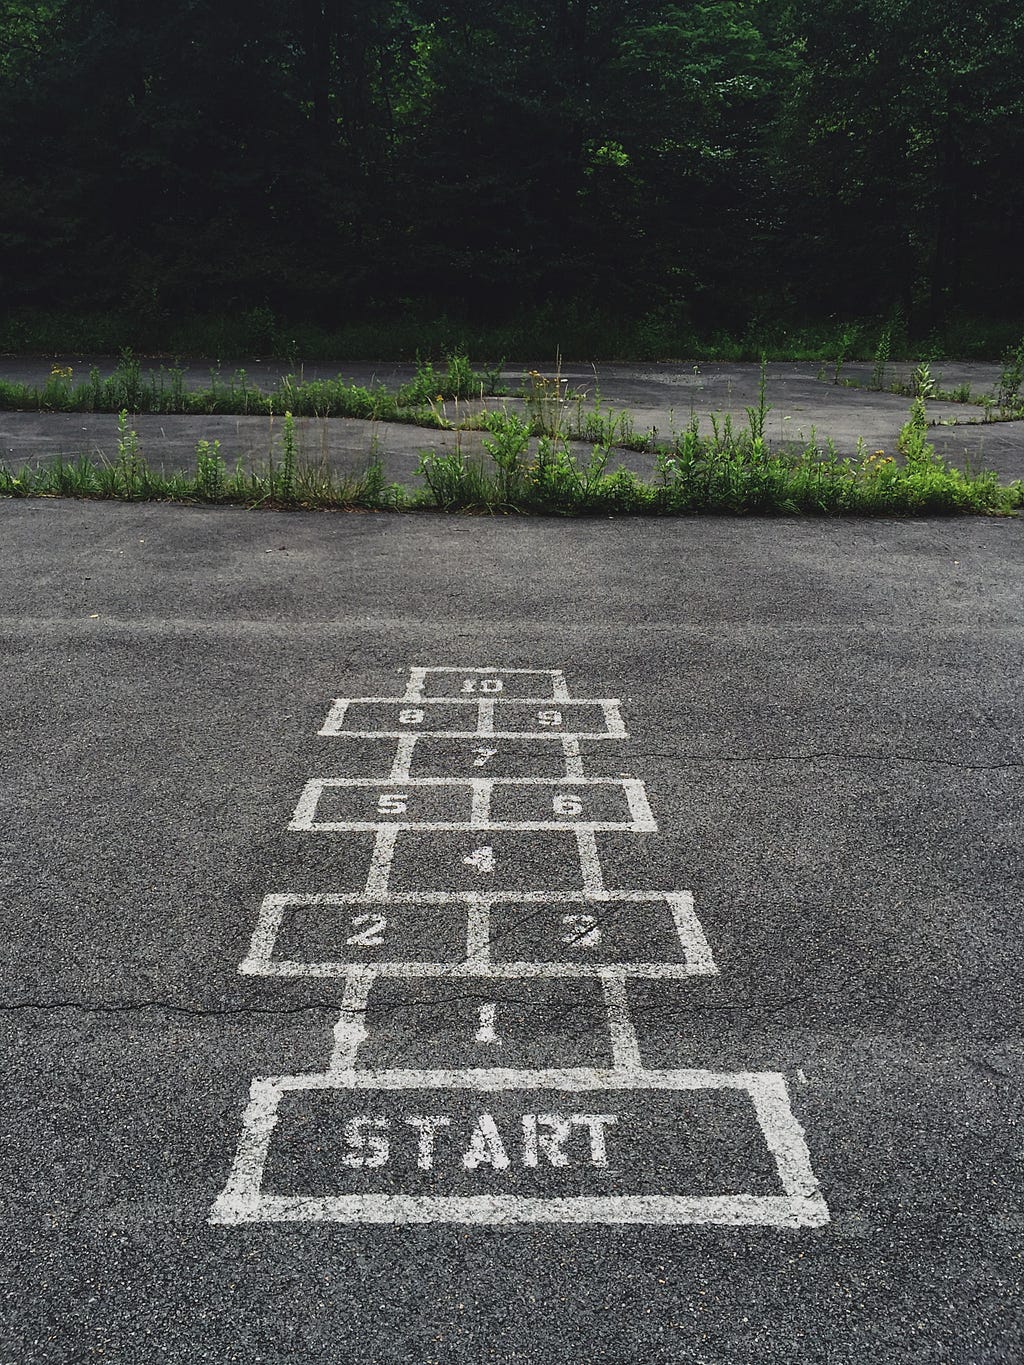 Photo of a mid grey tarmac space outdoors with a white outlines o a game of hopscotch, with a ‘start’ square in the foreground.